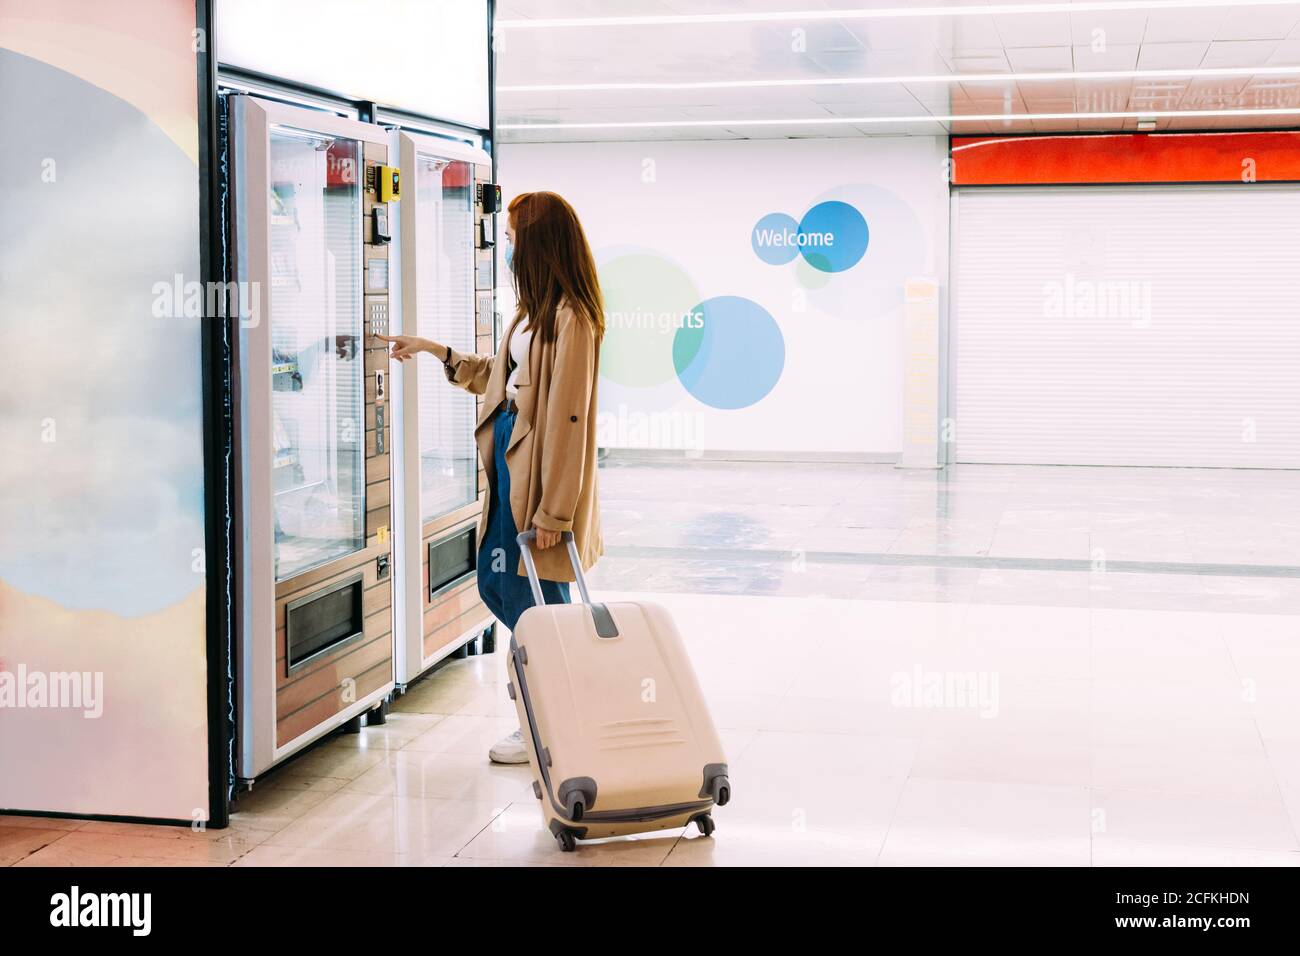 woman with a face mask uses the vending machine to buy a snack Stock Photo